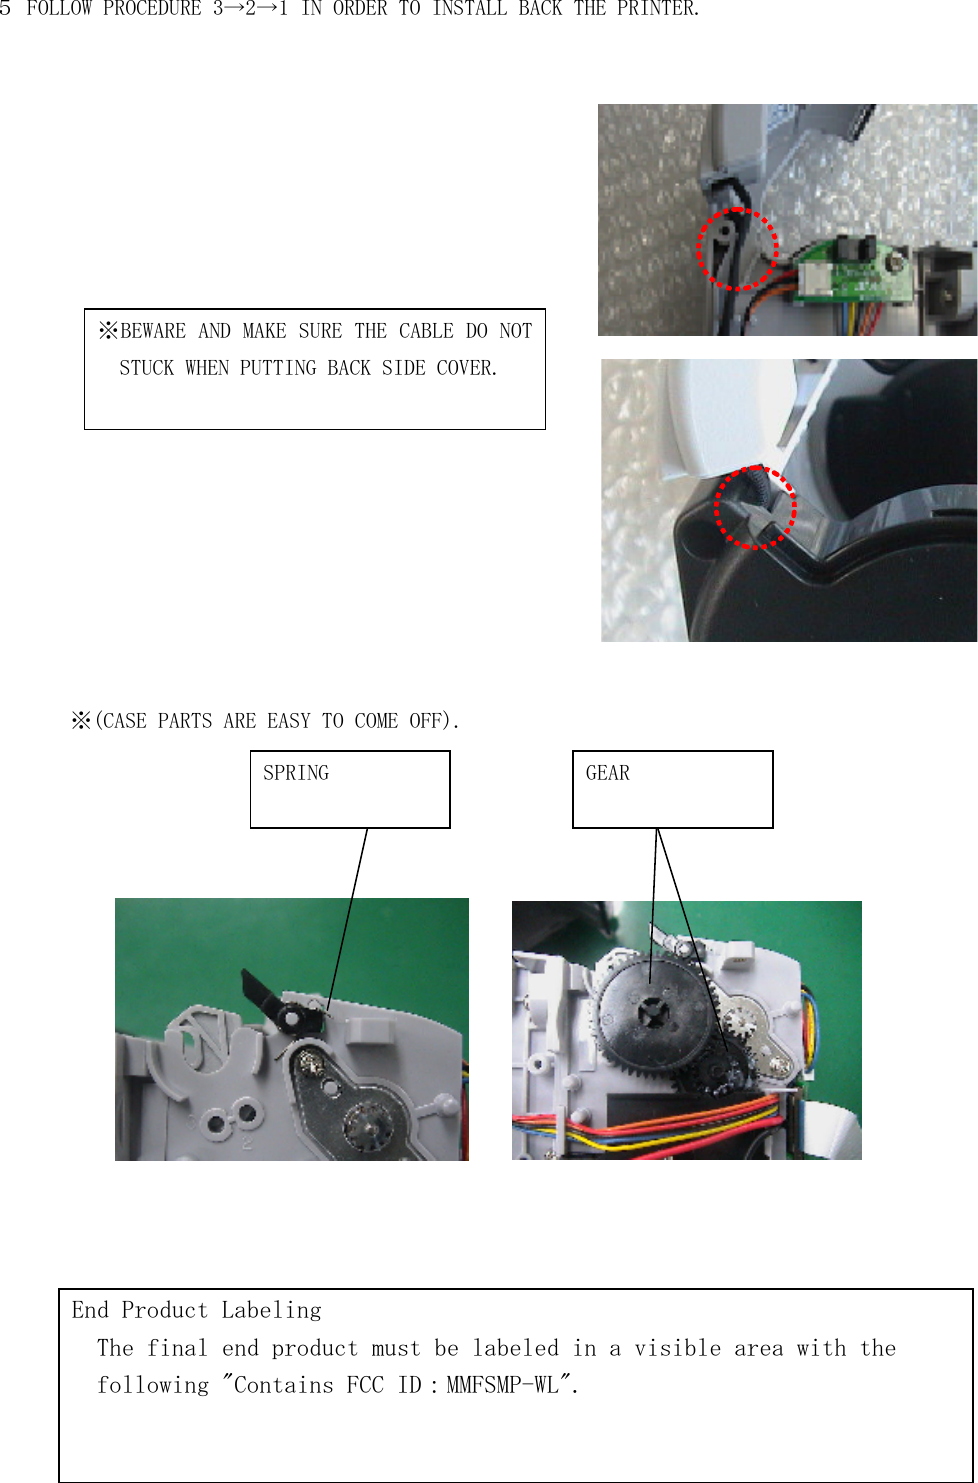 ５ FOLLOW PROCEDURE 3→2→1 IN ORDER TO INSTALL BACK THE PRINTER.                   ※(CASE PARTS ARE EASY TO COME OFF).                     ※BEWARE AND MAKE SURE THE CABLE DO NOT STUCK WHEN PUTTING BACK SIDE COVER. SPRING  GEAR End Product Labeling   The final end product must be labeled in a visible area with the   following &quot;Contains FCC ID：MMFSMP-WL&quot;. 